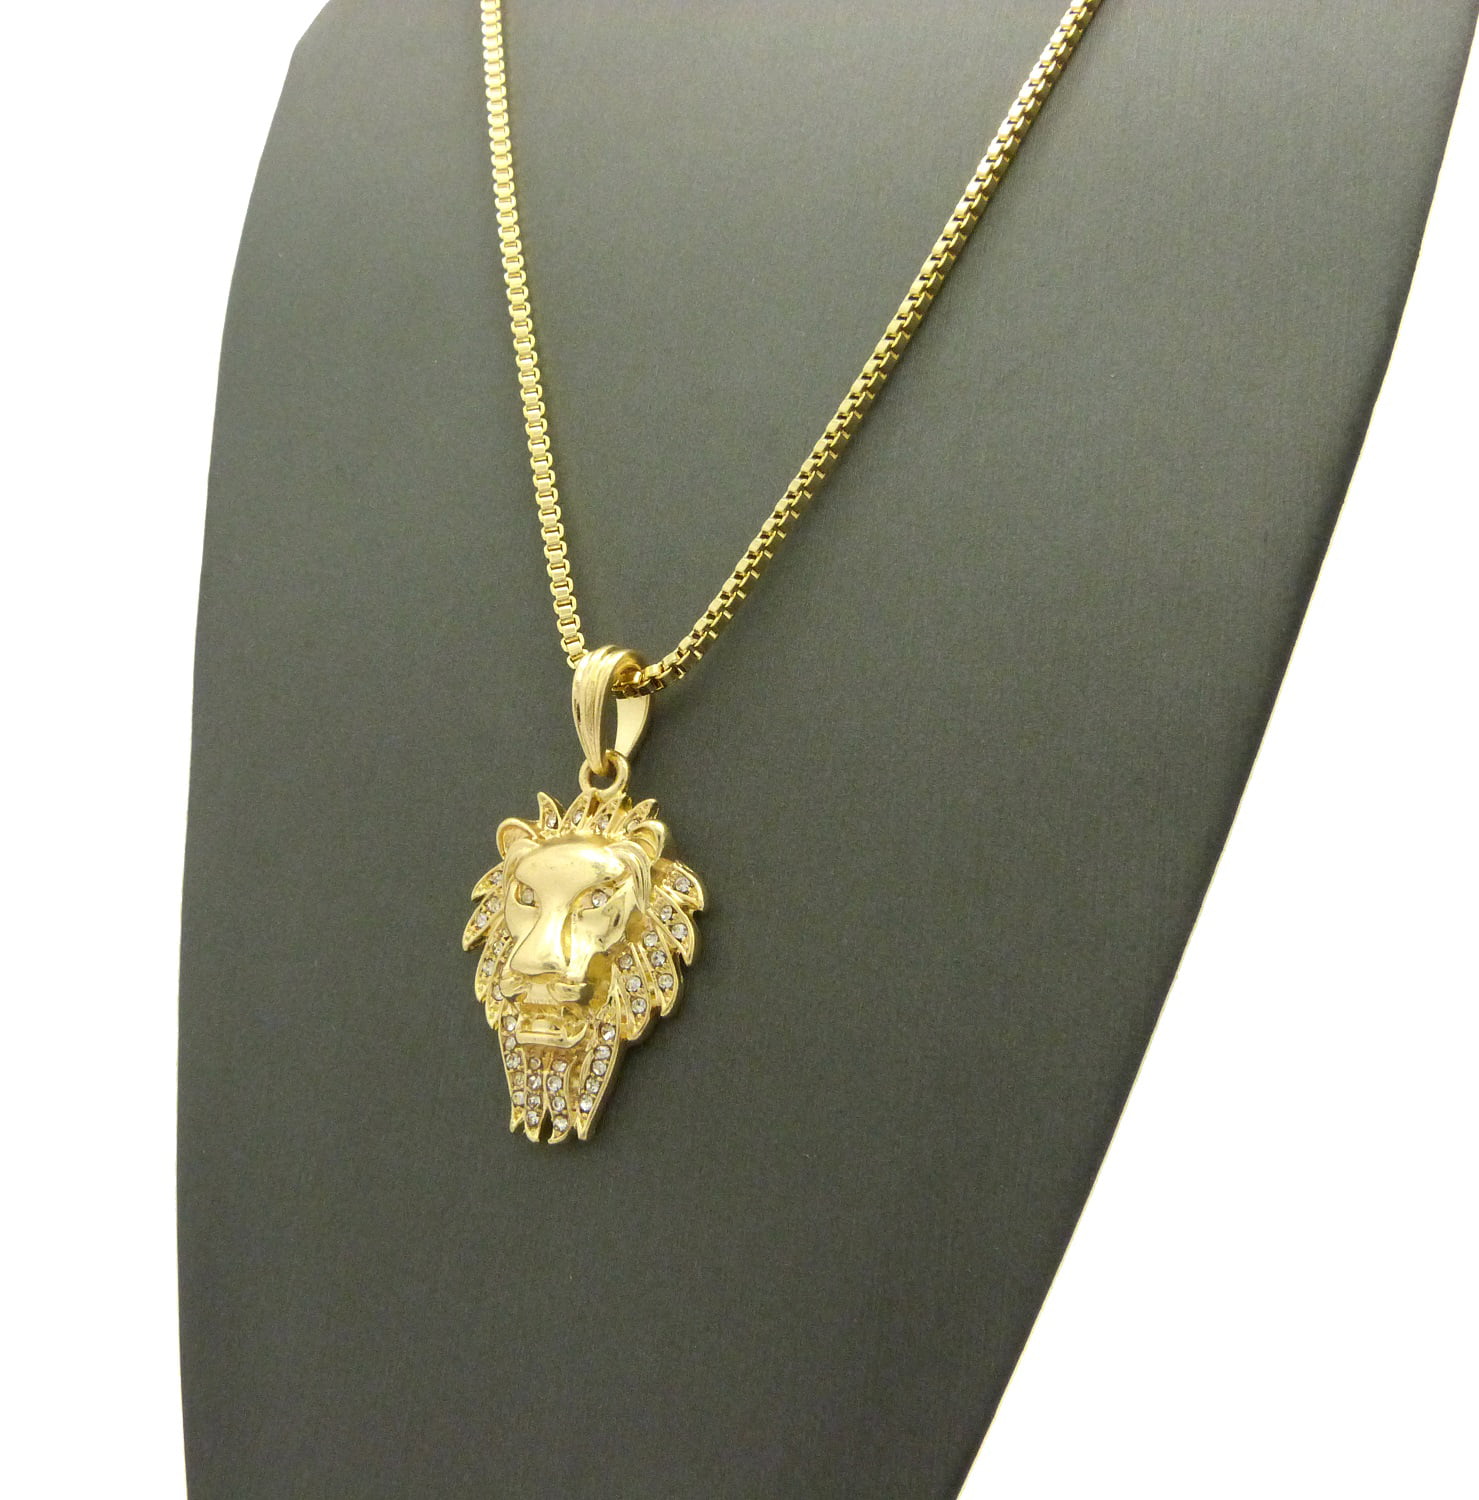 NYFASHION101 Engraved Lion Head Pendant 36 Wooden Bead Chain Necklace in Two Tone Black 